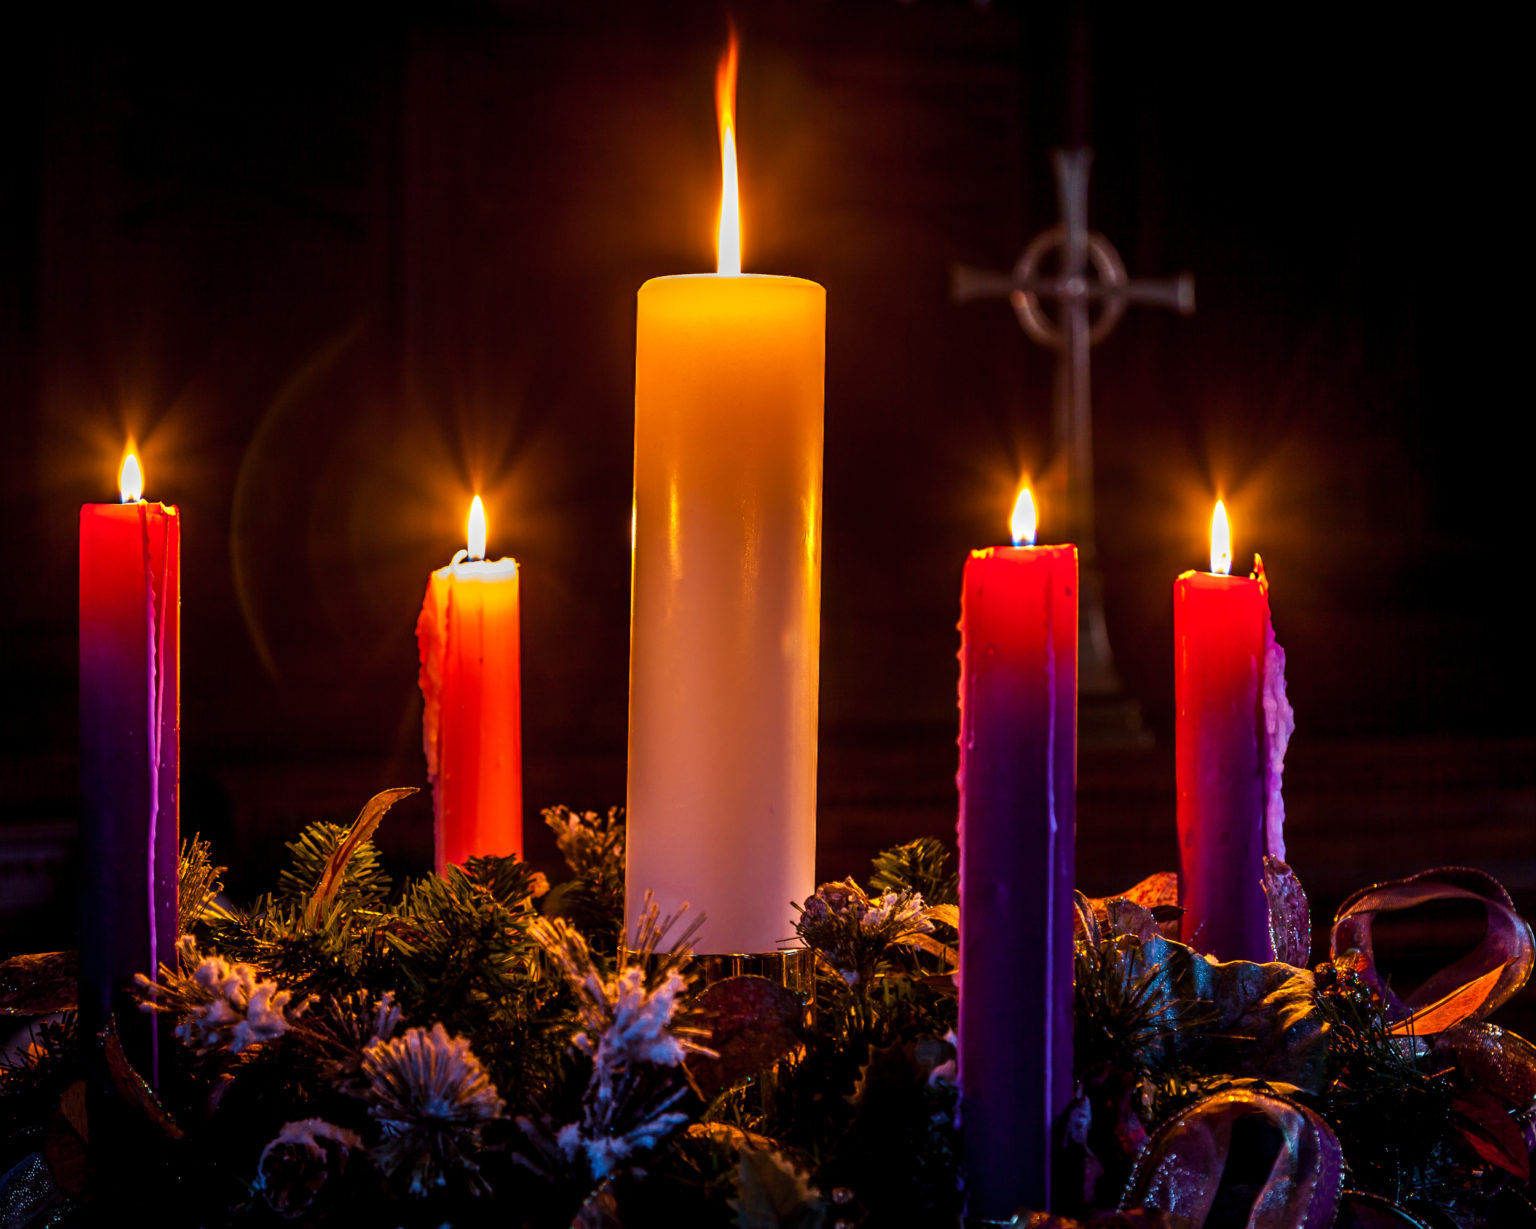 What Are The Colors Of The Advent Candles